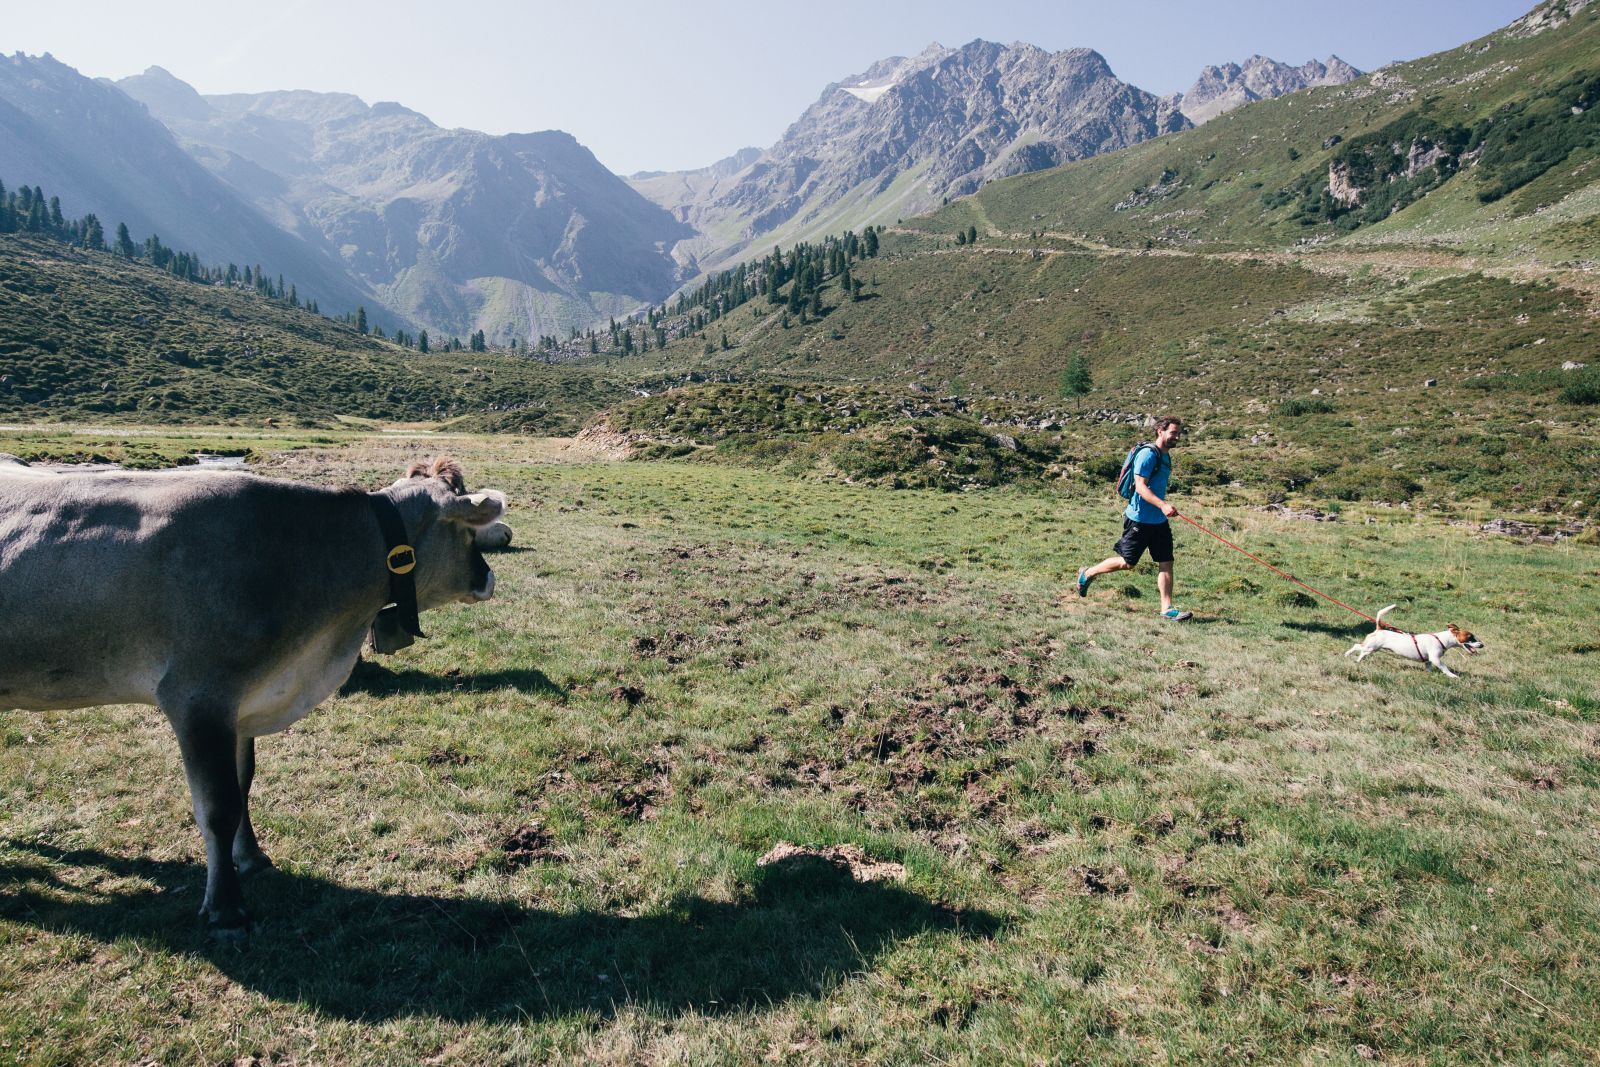 Cow; hiker with dog